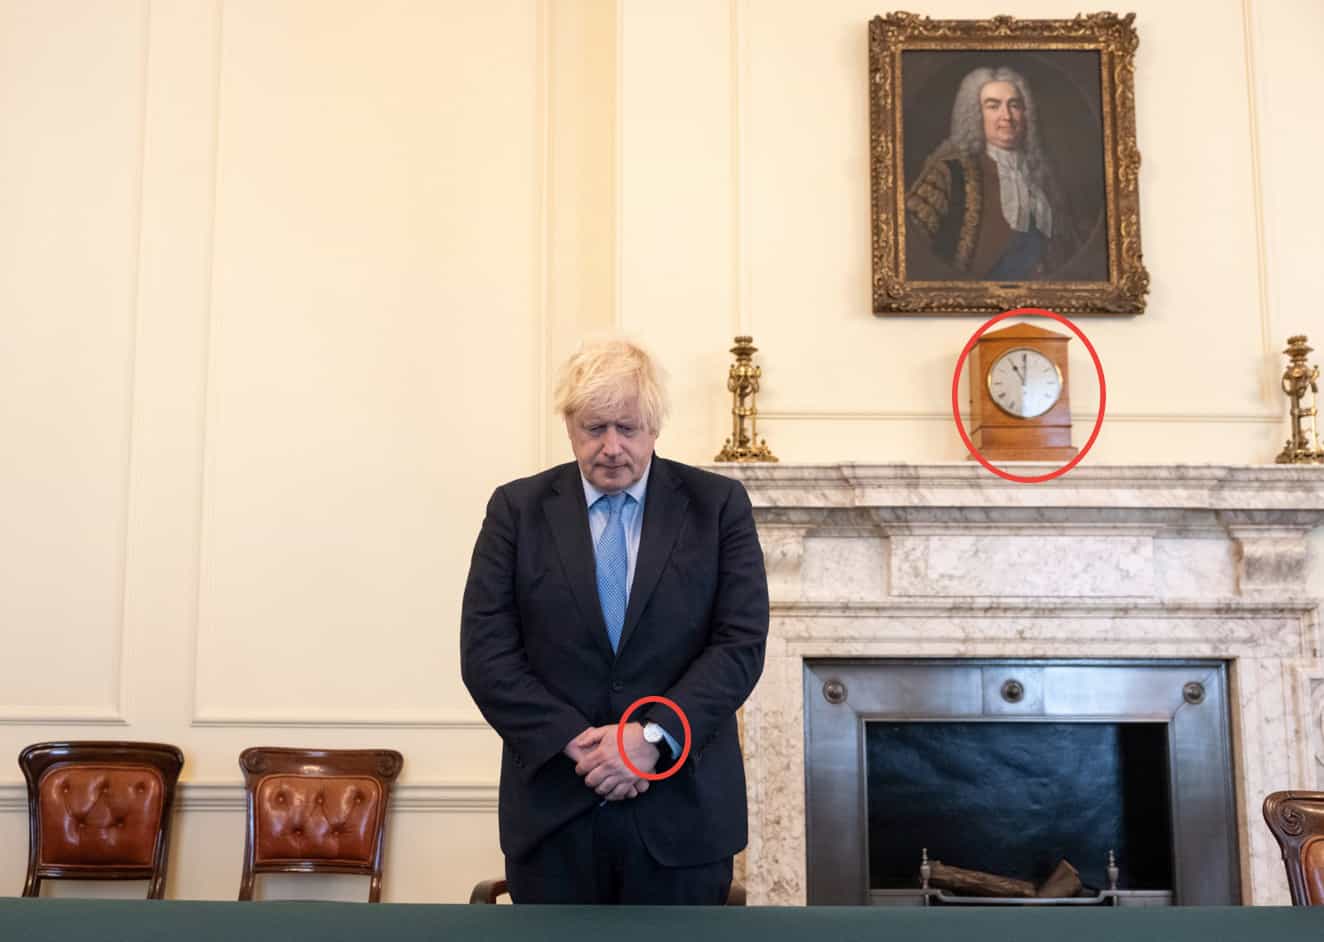 Boris Johnson’s watch 14 minutes fast during minute’s silence for Plymouth victims